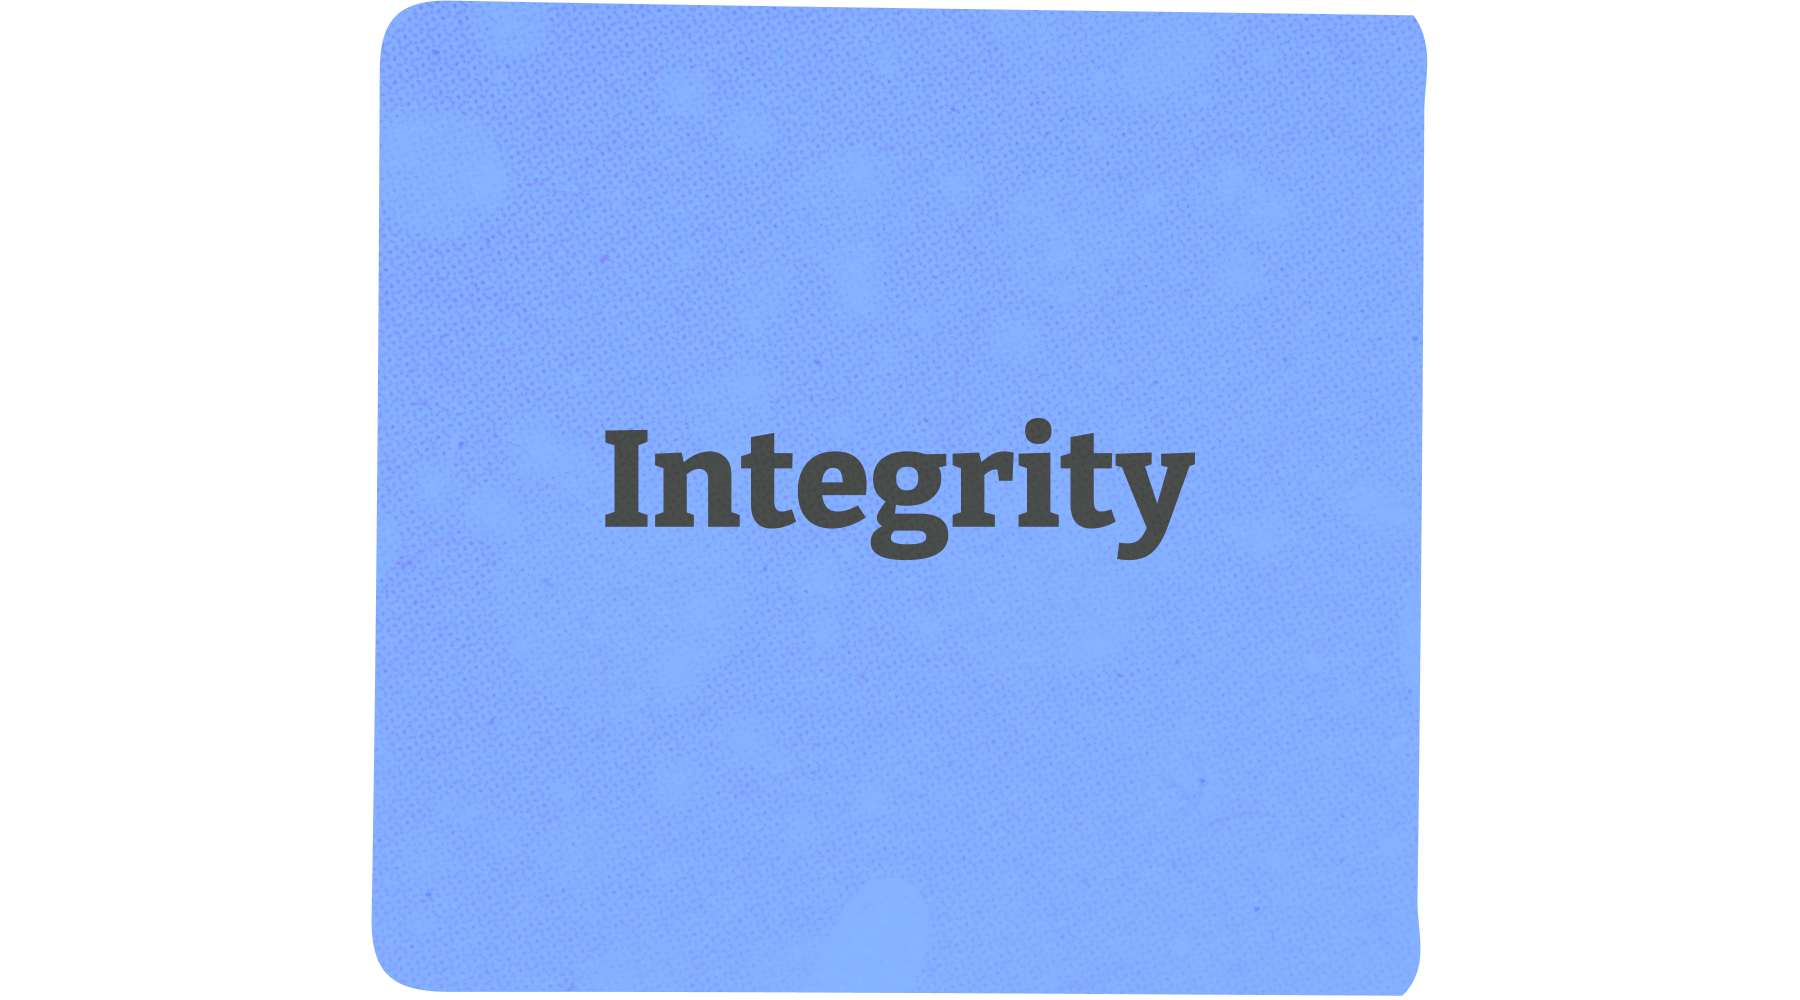 blue square with the word "integrity" written in the middle in black text